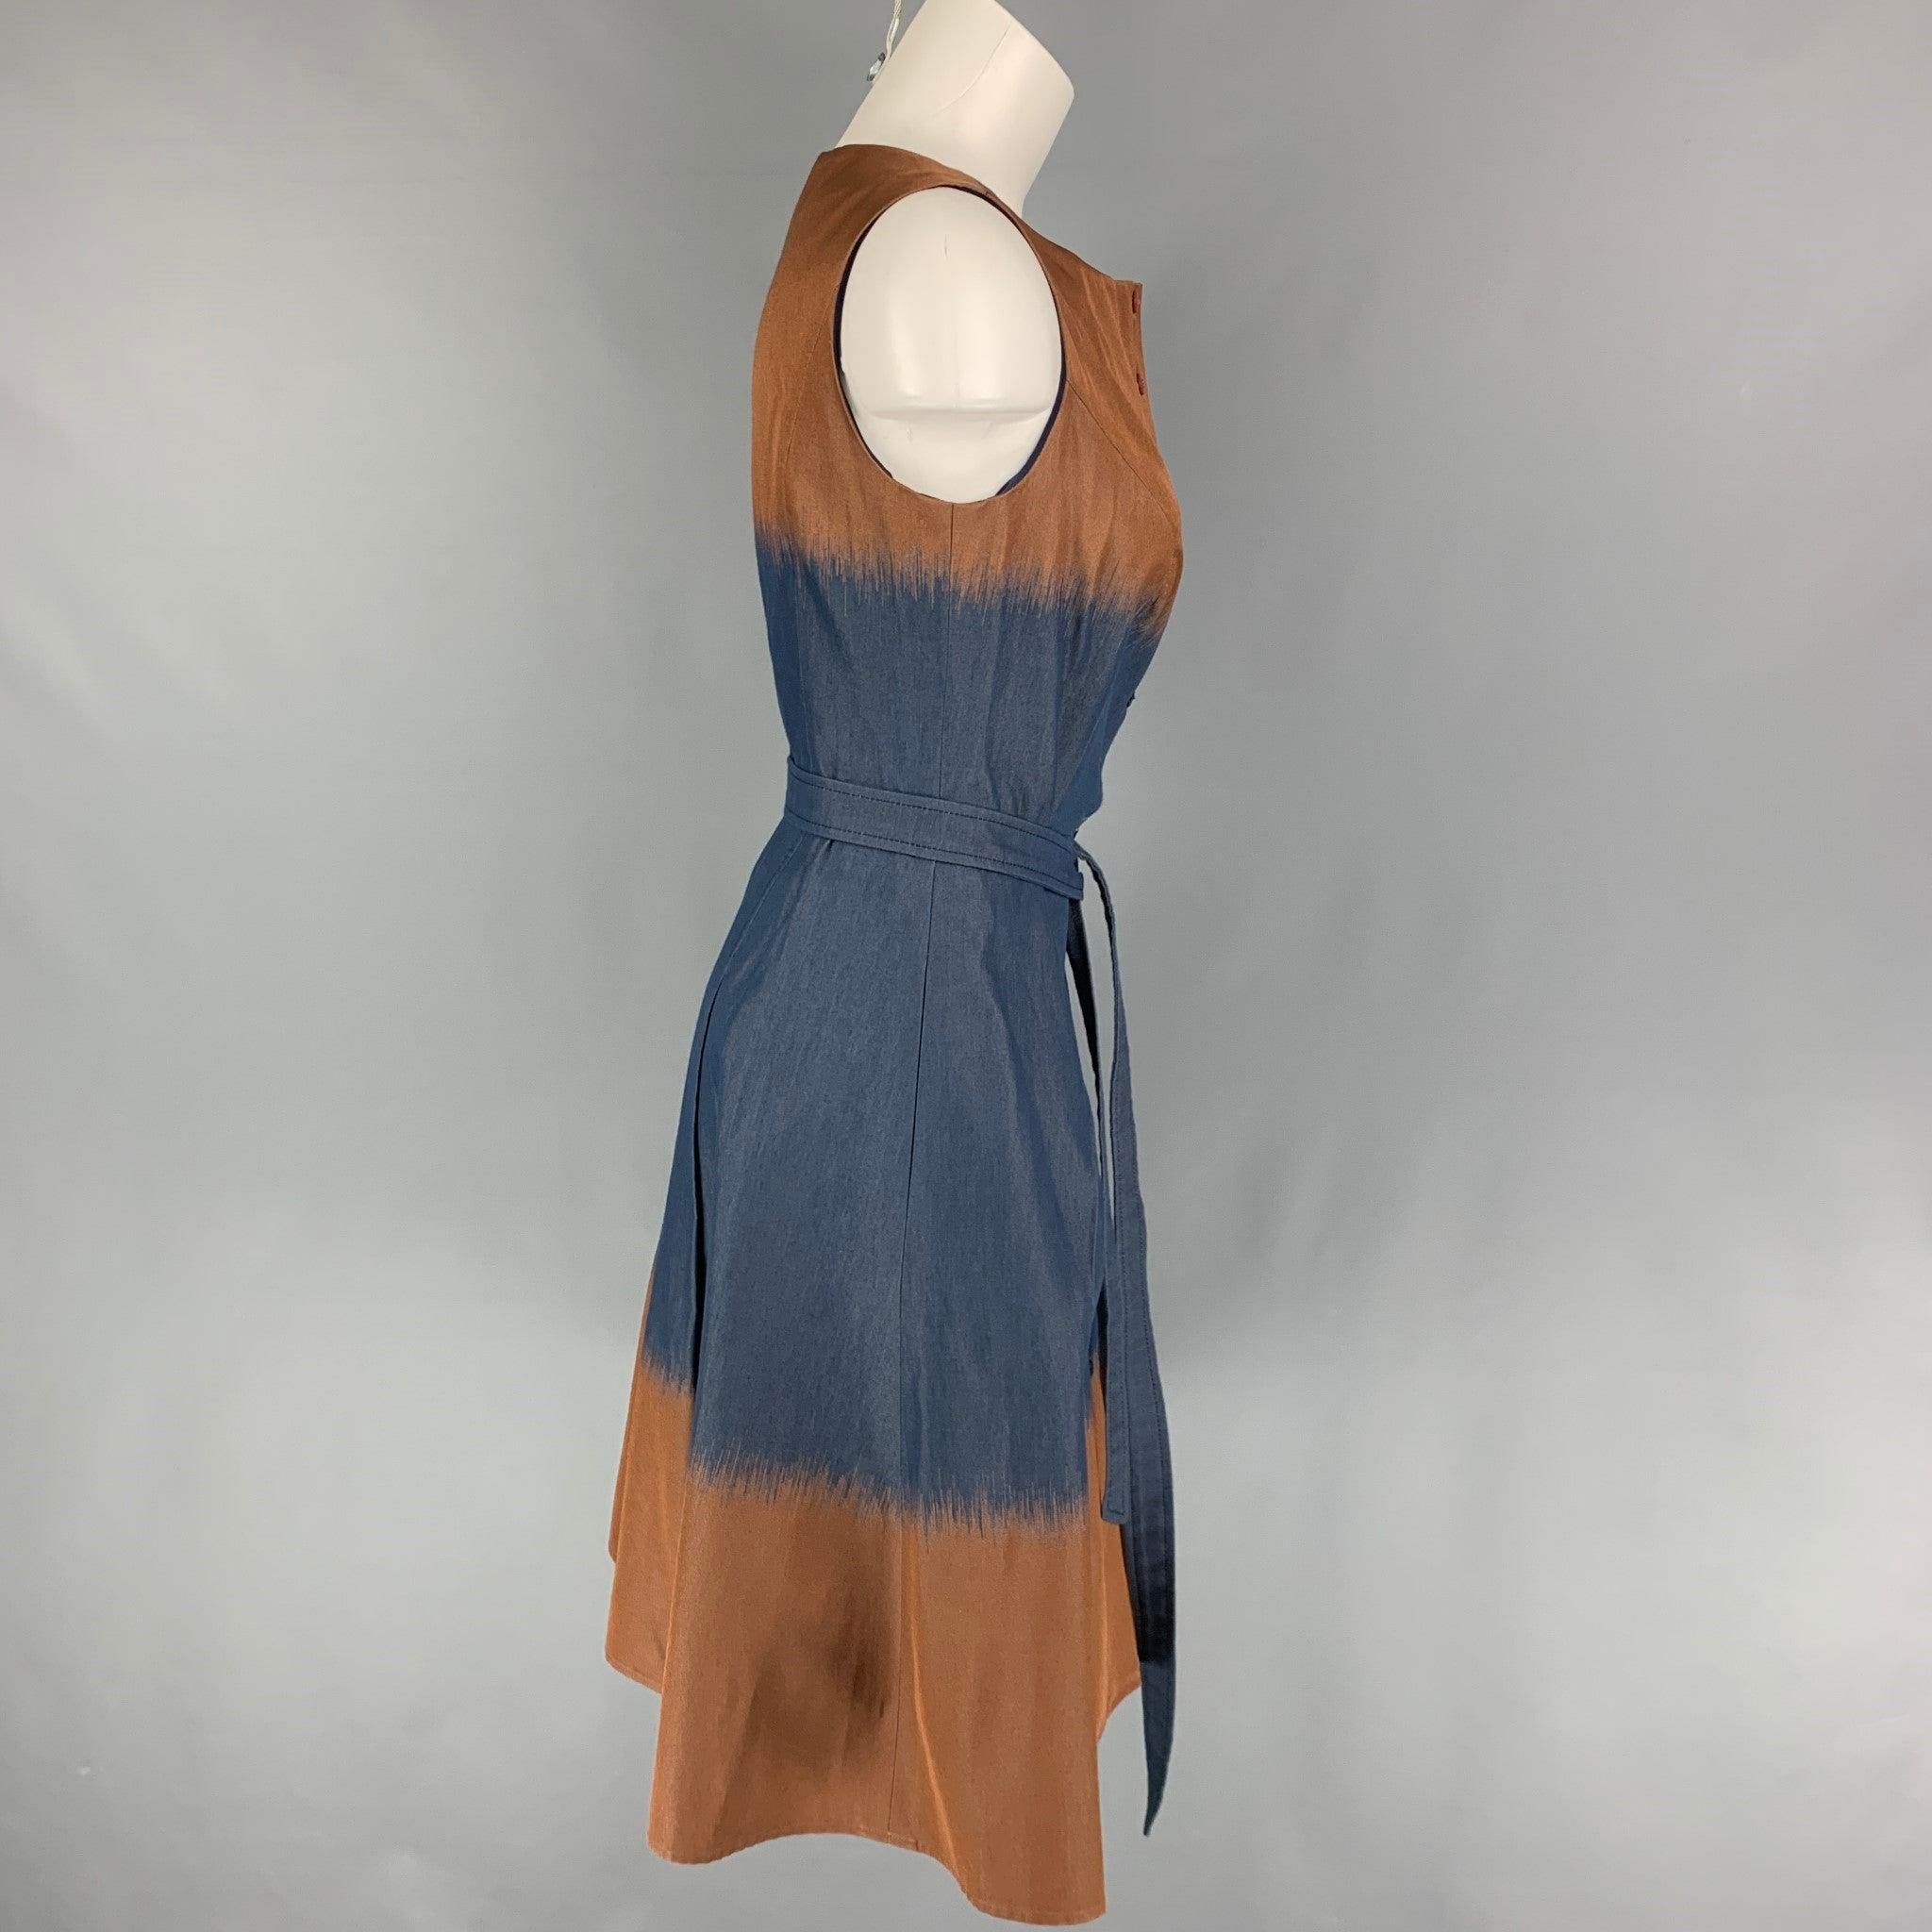 CAROLINA HERRERA dress comes in a navy & brown ombre cotton blend featuring an a-line style, belted, pleated, sleeveless, and a front buttoned closure. Made in USA.
Very Good
Pre-Owned Condition. 

Marked:   8 

Measurements: 
 
Shoulder: 13.75